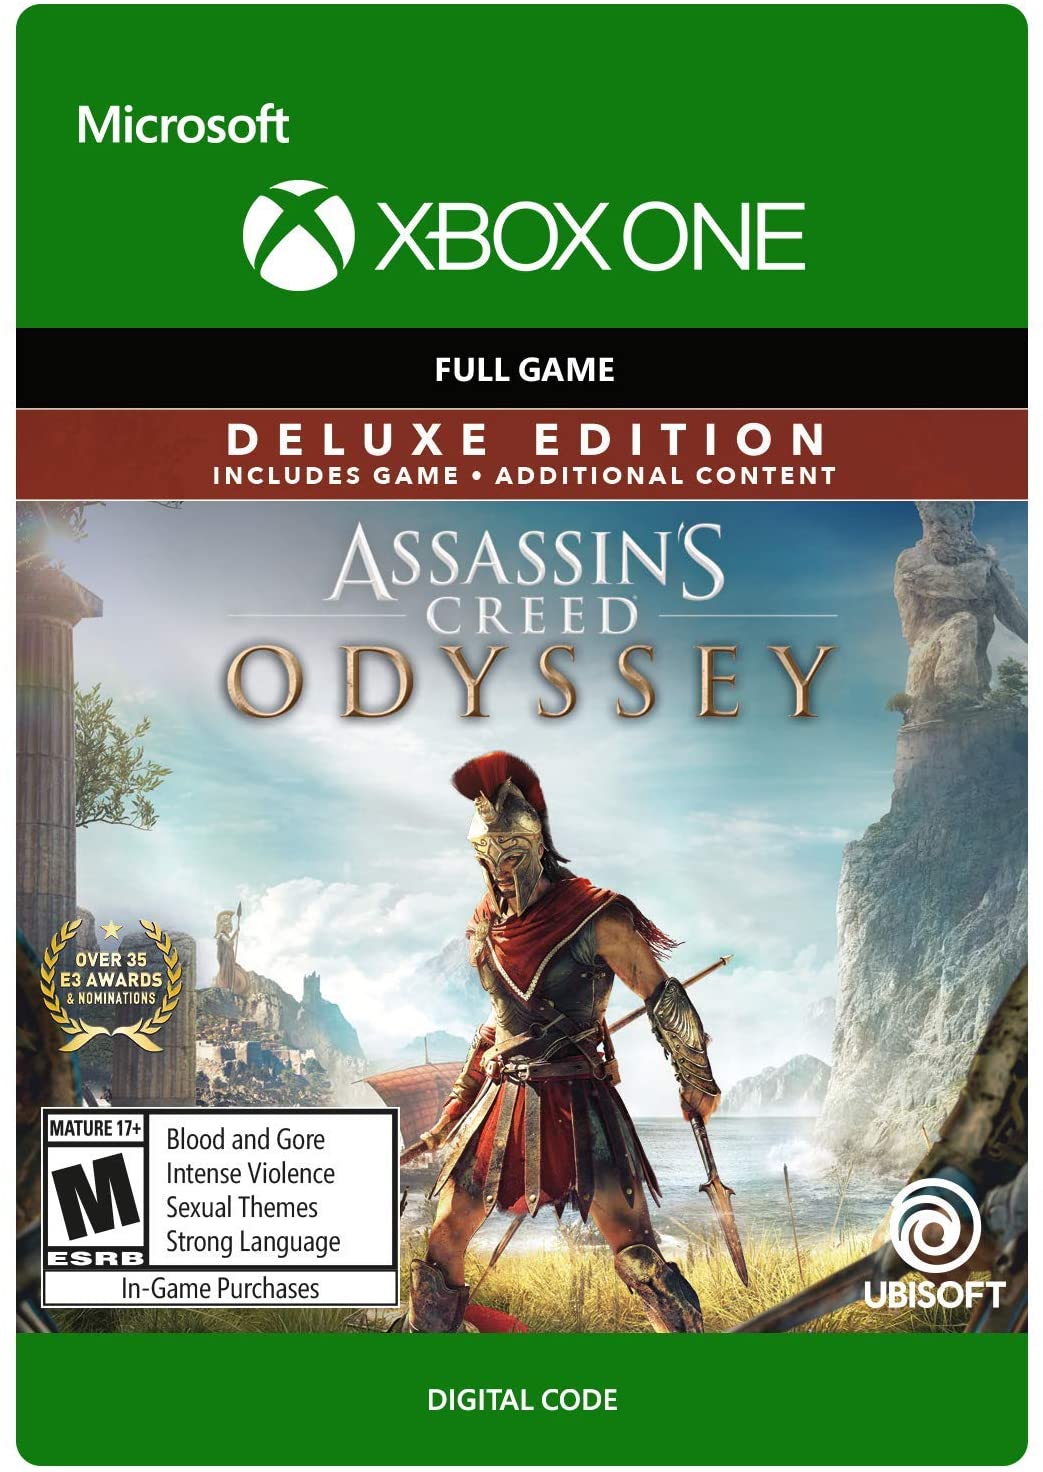 Assassin's Creed Odyssey Deluxe Edition Key (Xbox One): VPN Activated Key